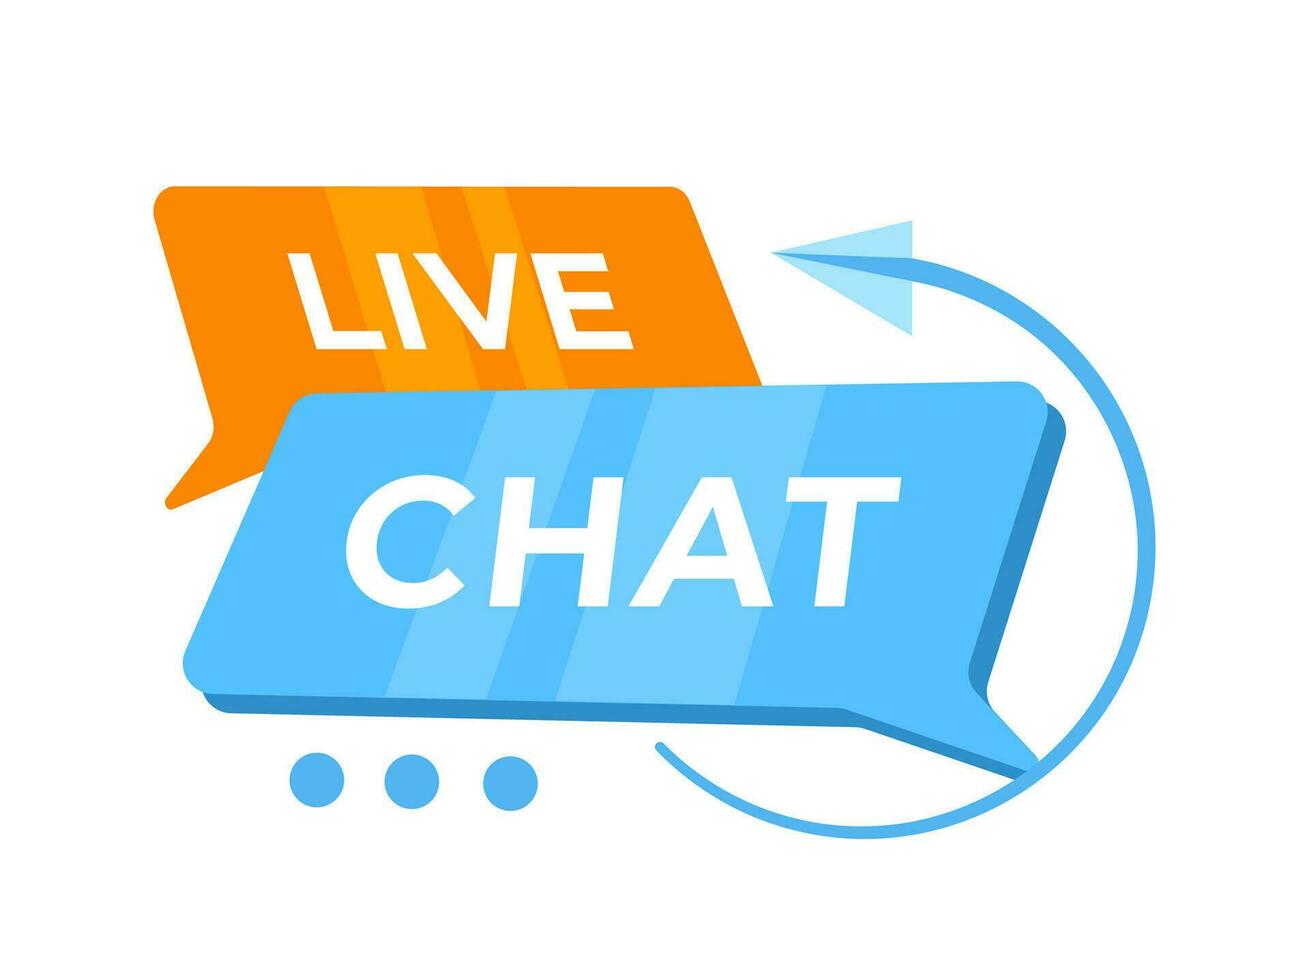 Dynamic vector illustration of a Live Chat service concept with colorful speech bubbles, ideal for online support and real-time customer communication